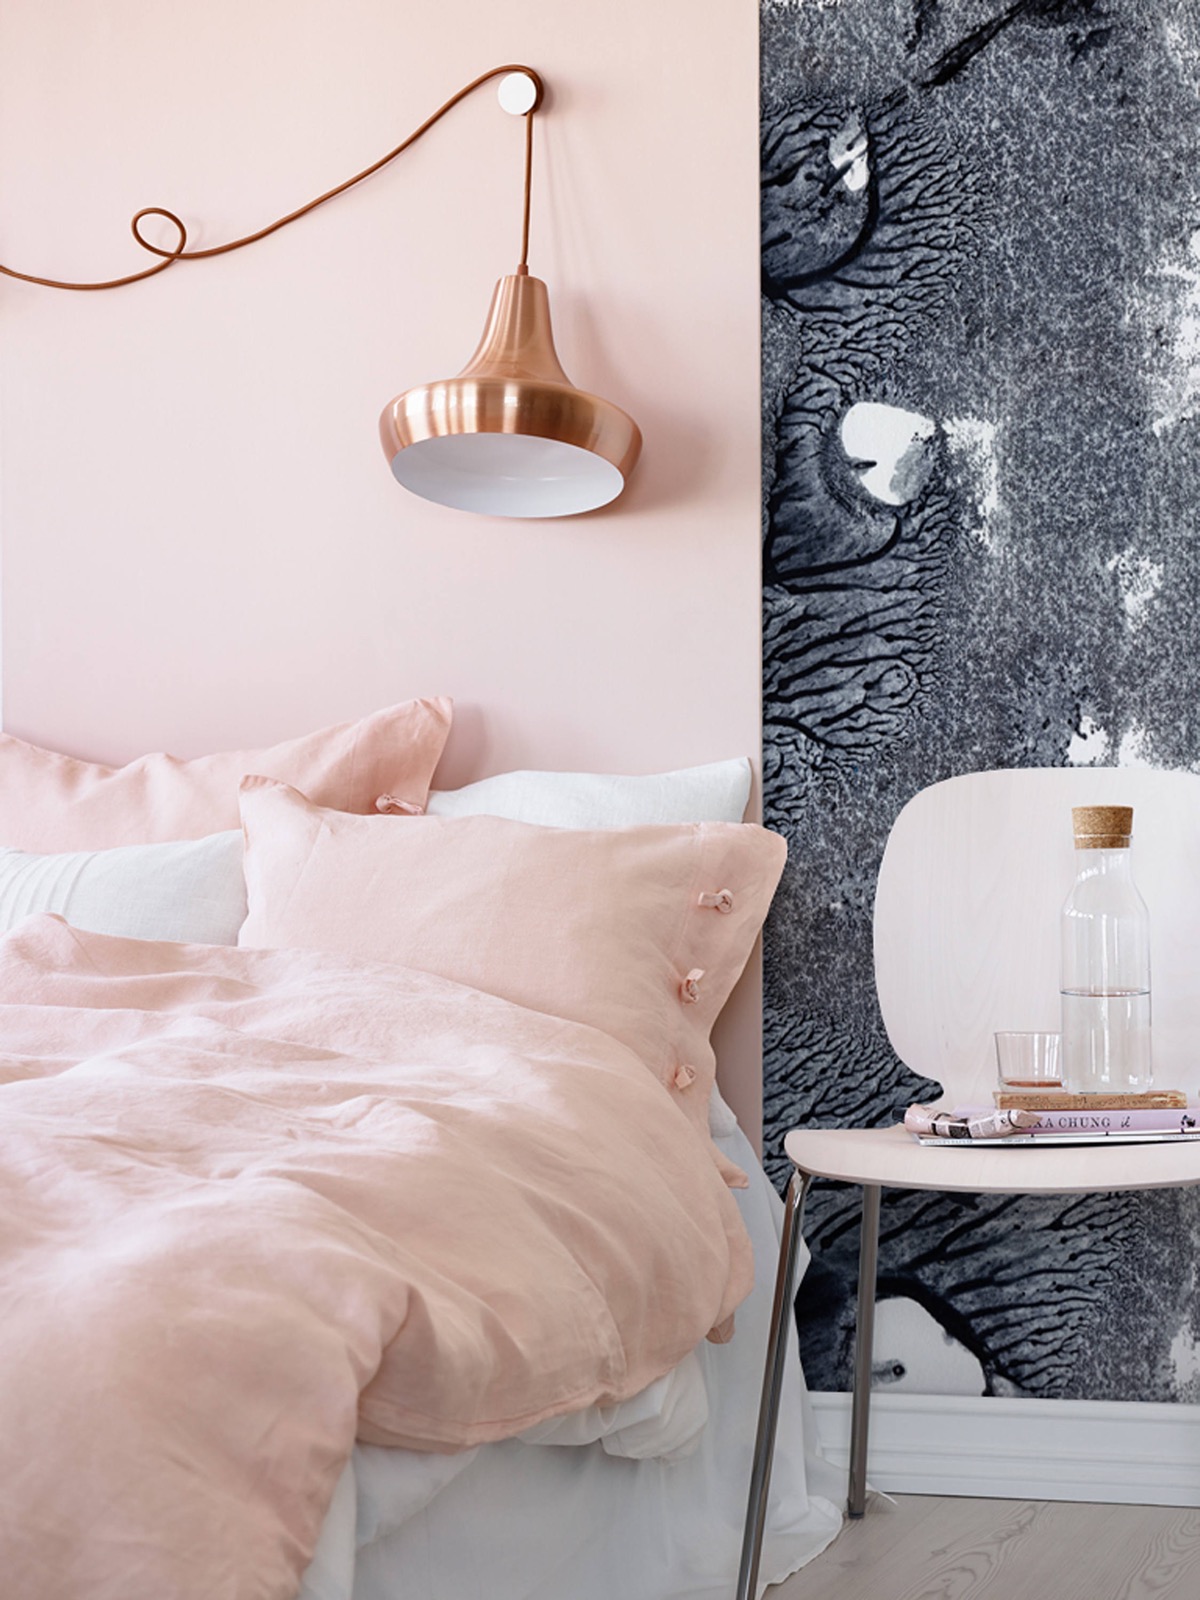 101 Pink Bedrooms With Images Tips And Accessories To Help